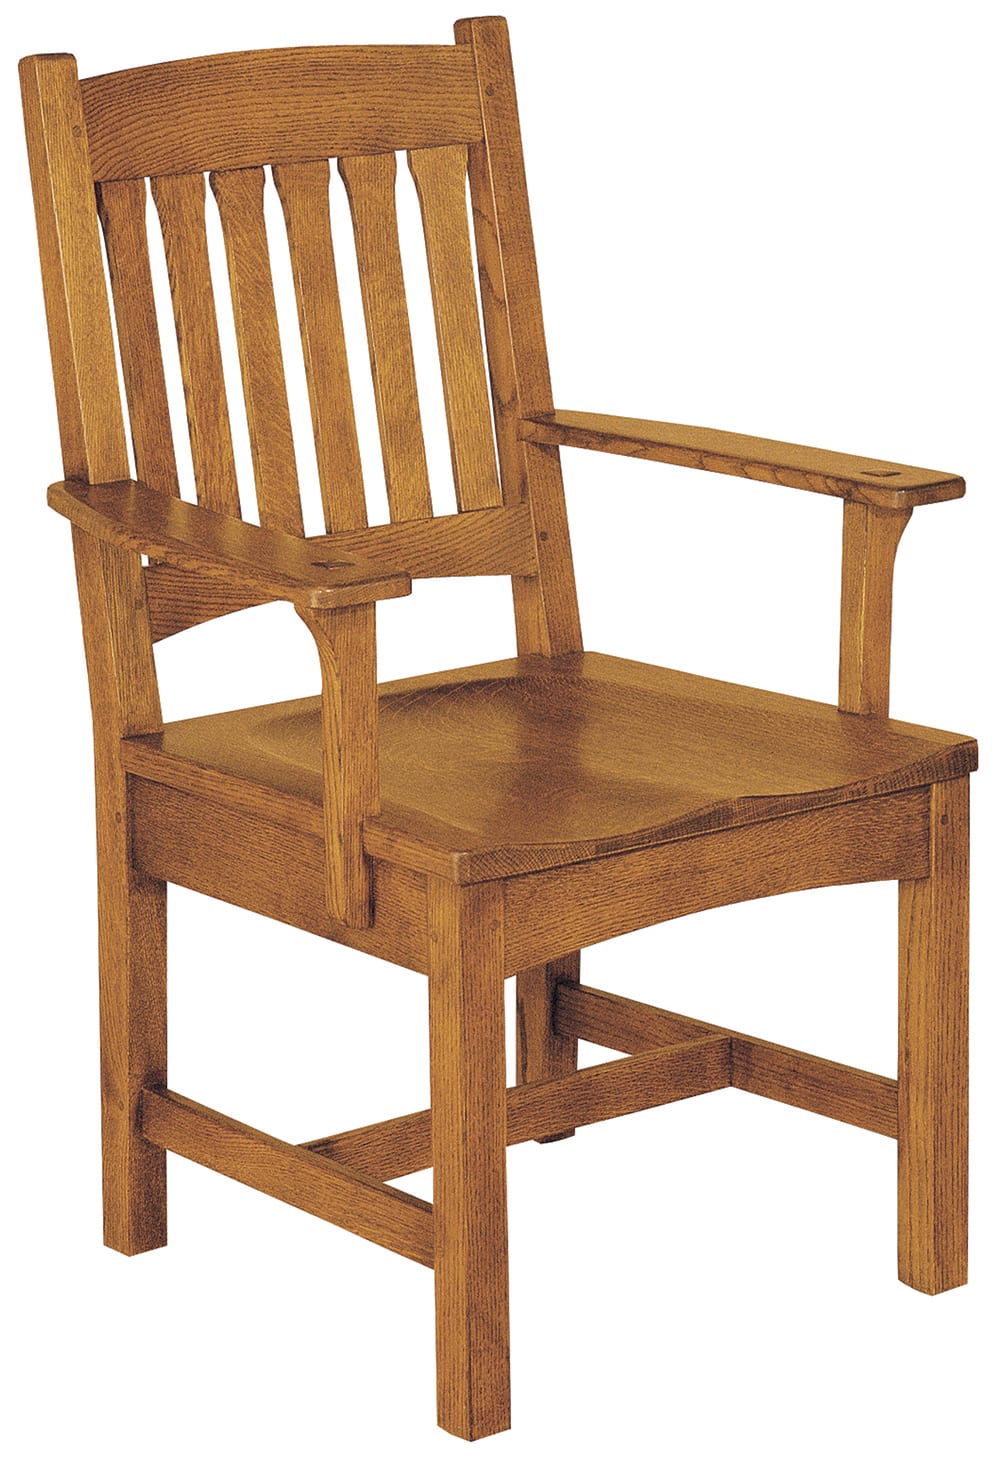 sitting chair wood Hot Sale - OFF 74%